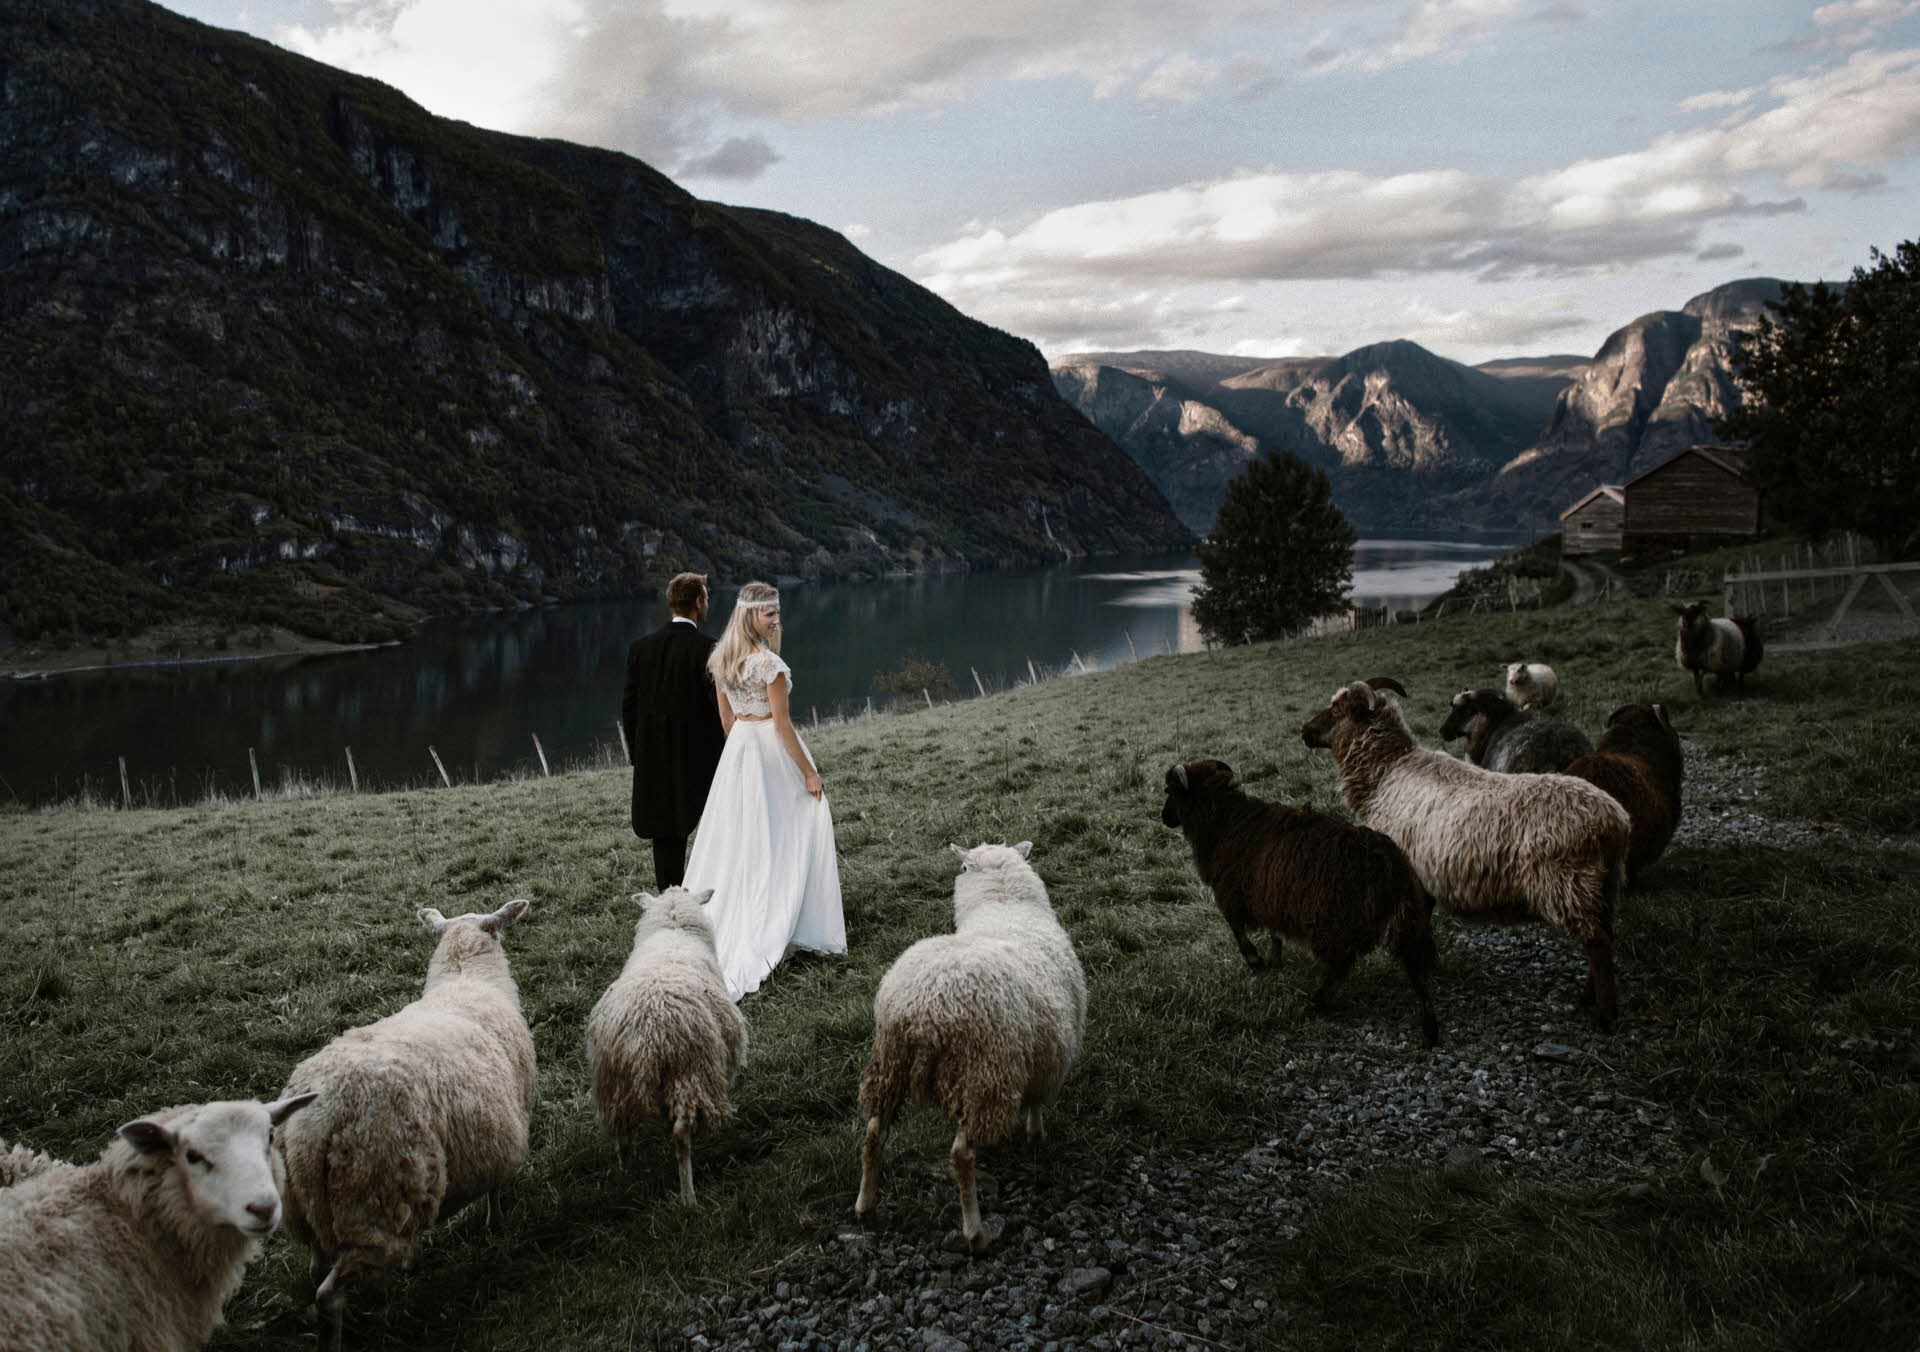 A groom and a bride in white, long dress walking on a field surrounded by sheep. The Aurlandsfjord in the background. 